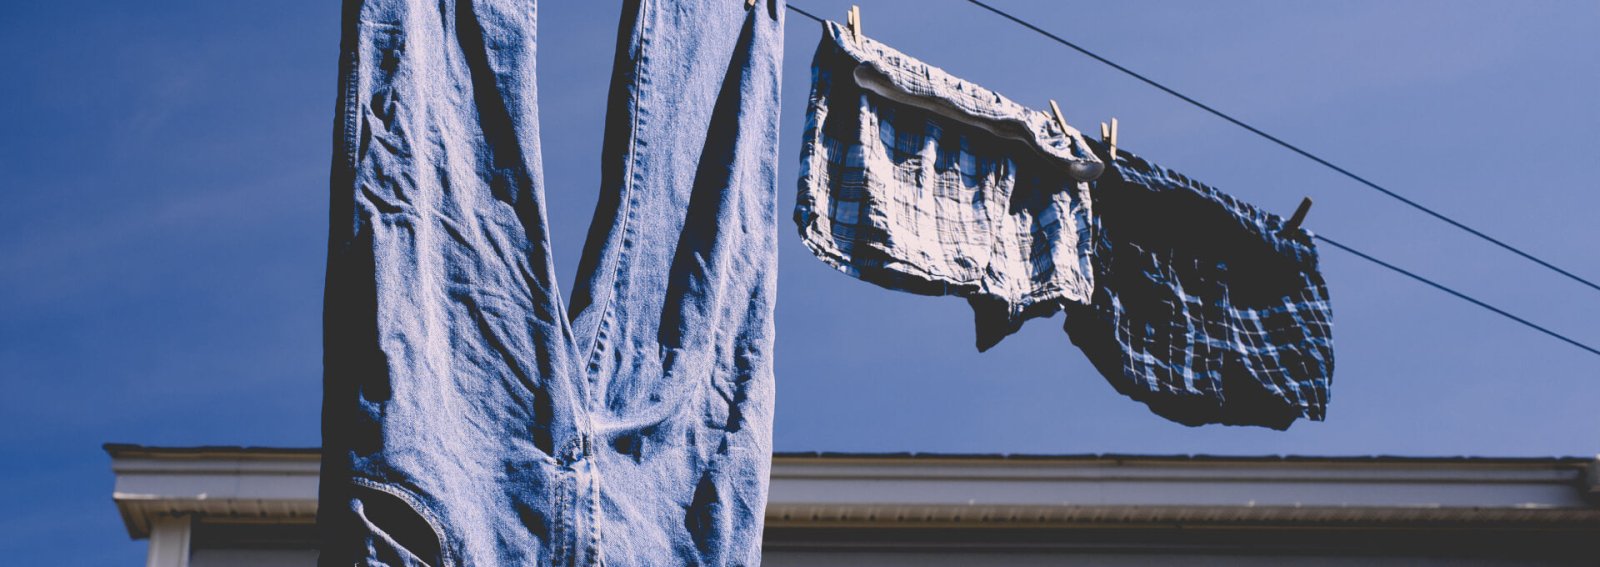 How to Wash Jeans Without Shrinking for Long-Lasting Wear